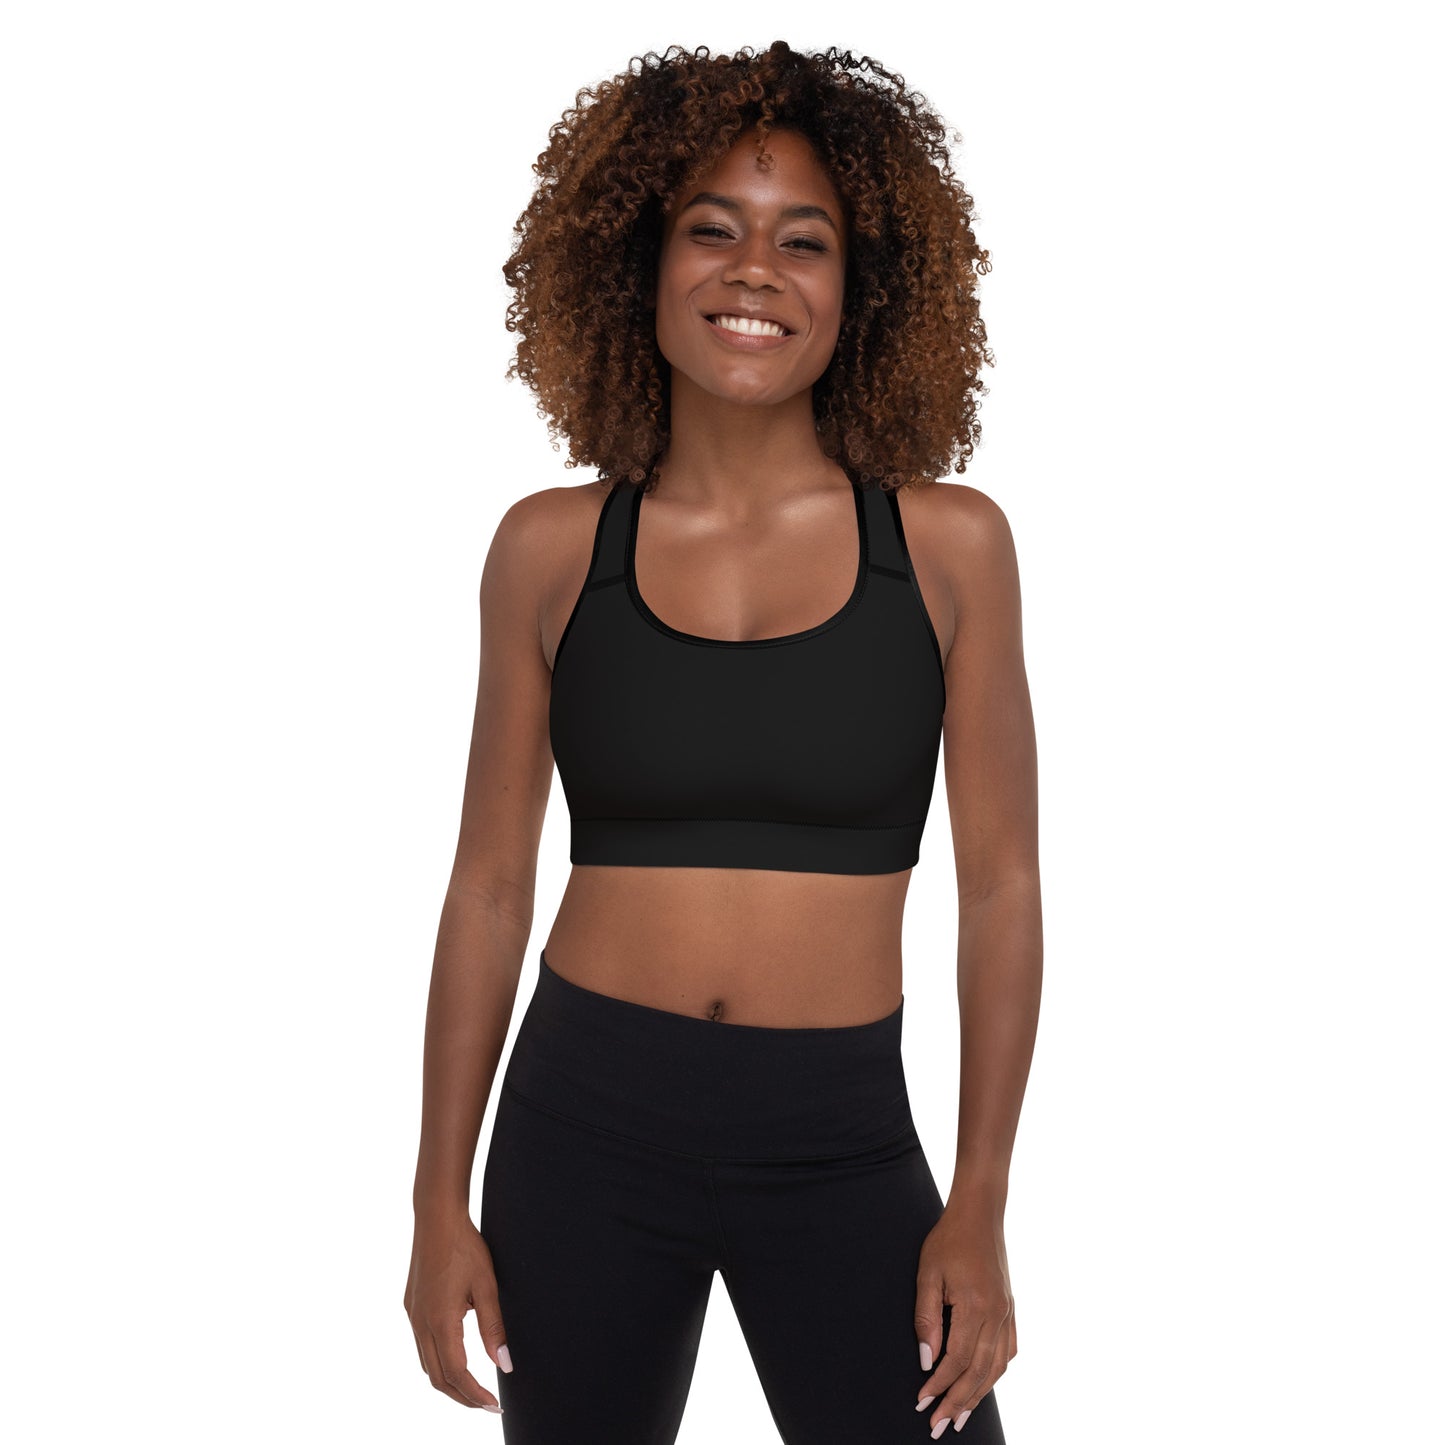 A picture of a women looking at the camera wearing a Black padded sports bra - crop top - front side